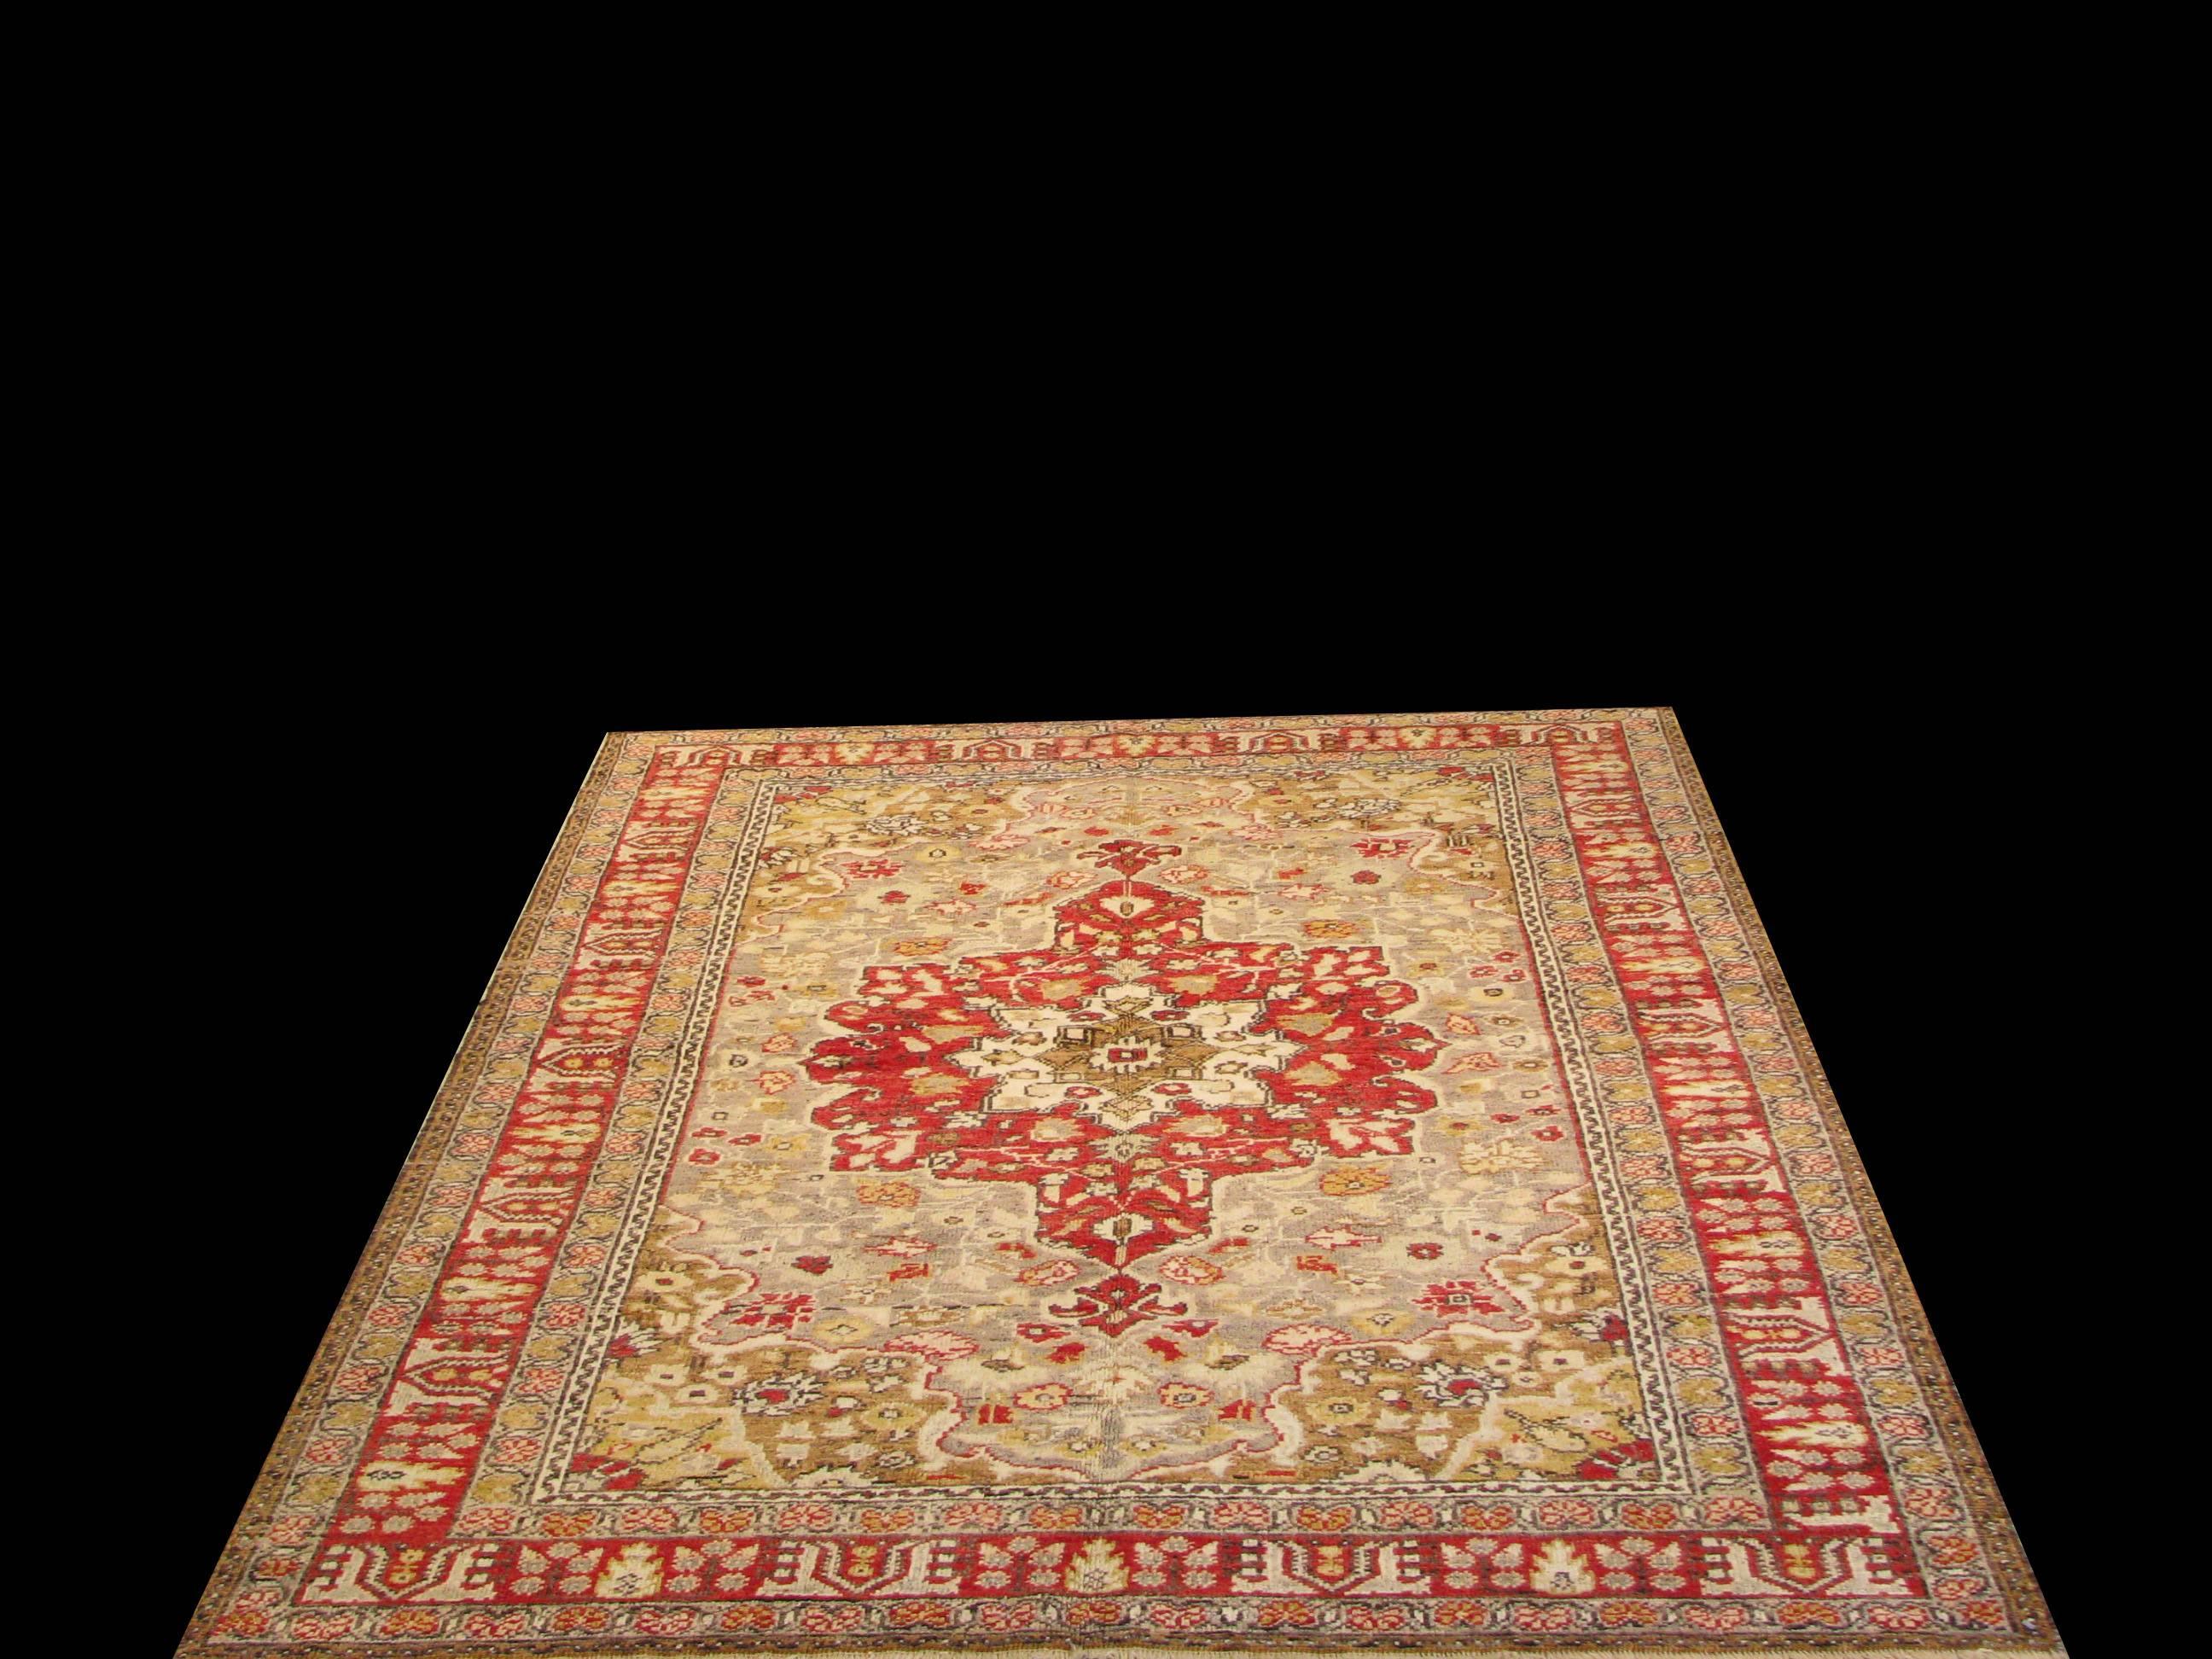 Rug weaving in Anatolia first began with the arrival of the Turkish tribes from Central Asia, who settled in this region. Therefore, Anatolian rugs form a branch of ethnic Turkish rugs. Some of the oldest examples known are the eighteen surviving